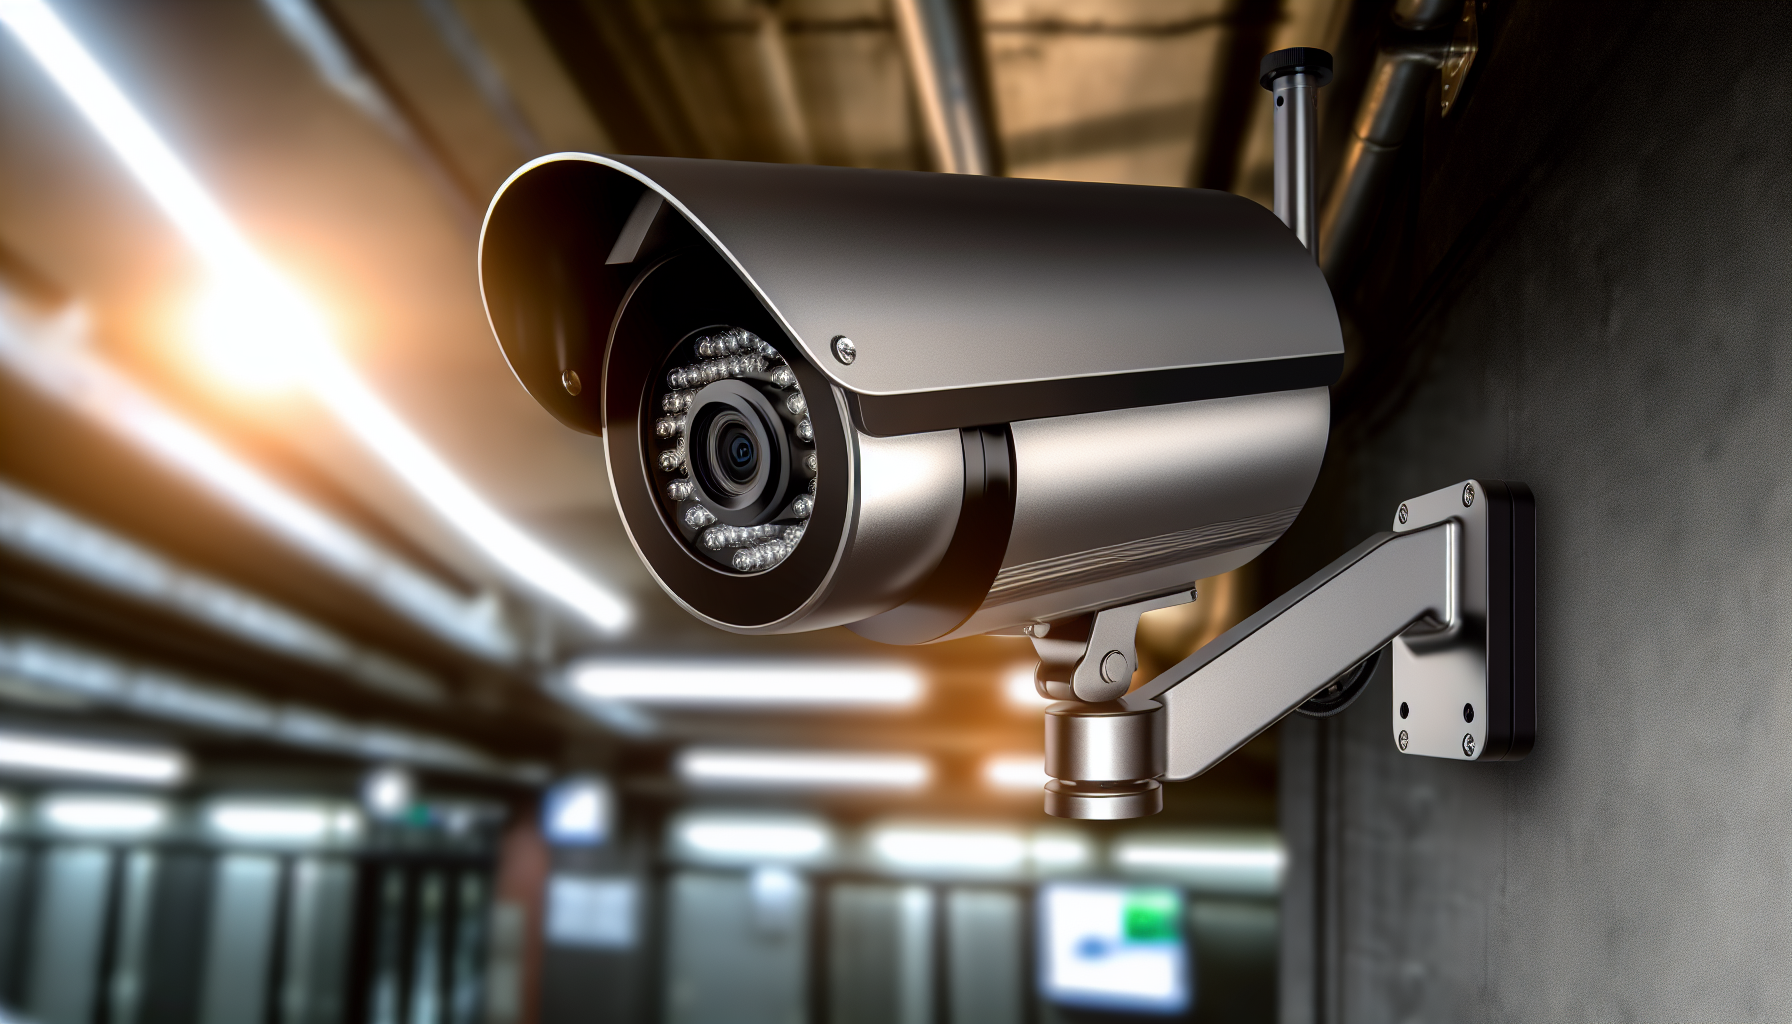 State-of-the-art surveillance camera with AI capabilities